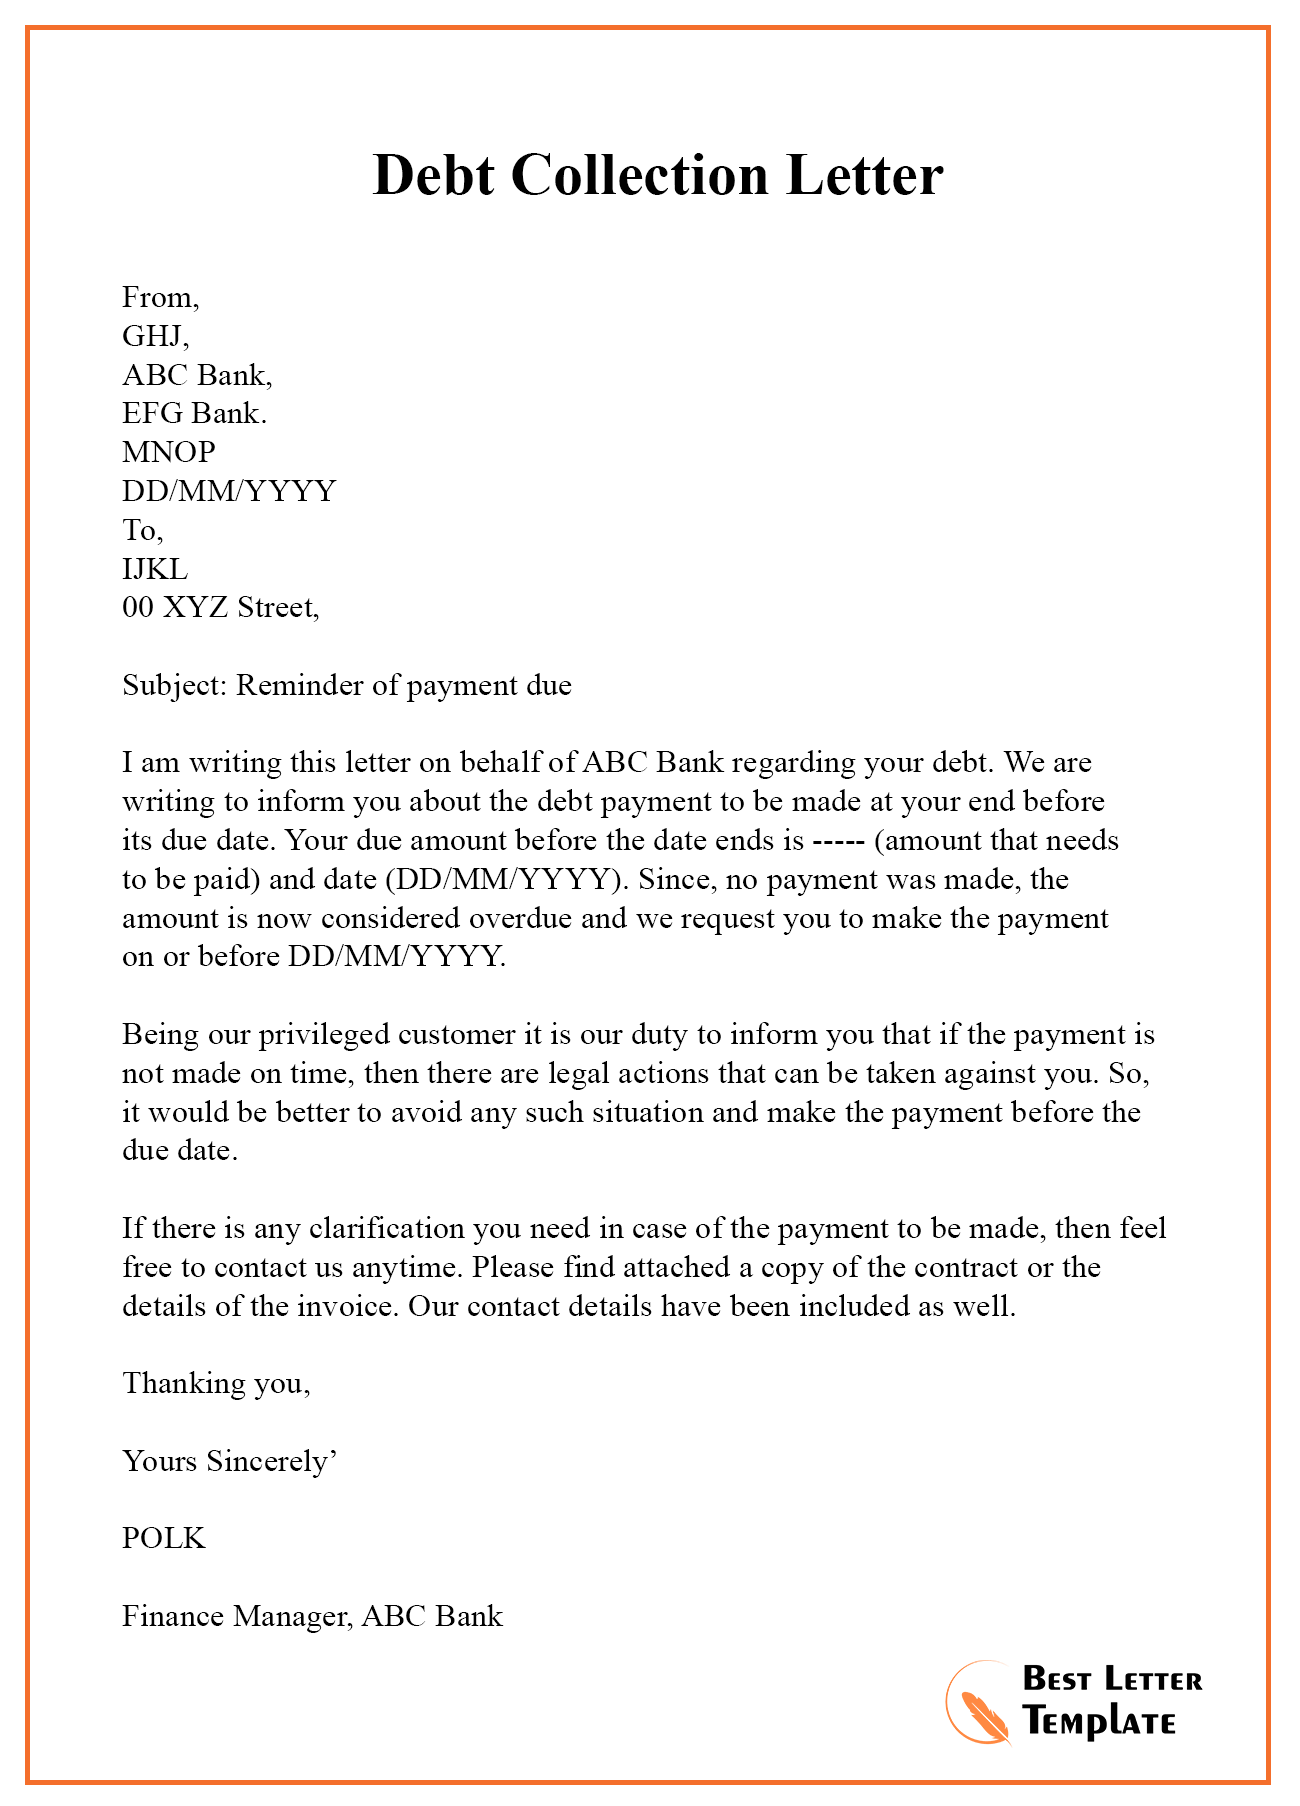 7+ Free Collection Letter Template Format, Sample & Example (2022)